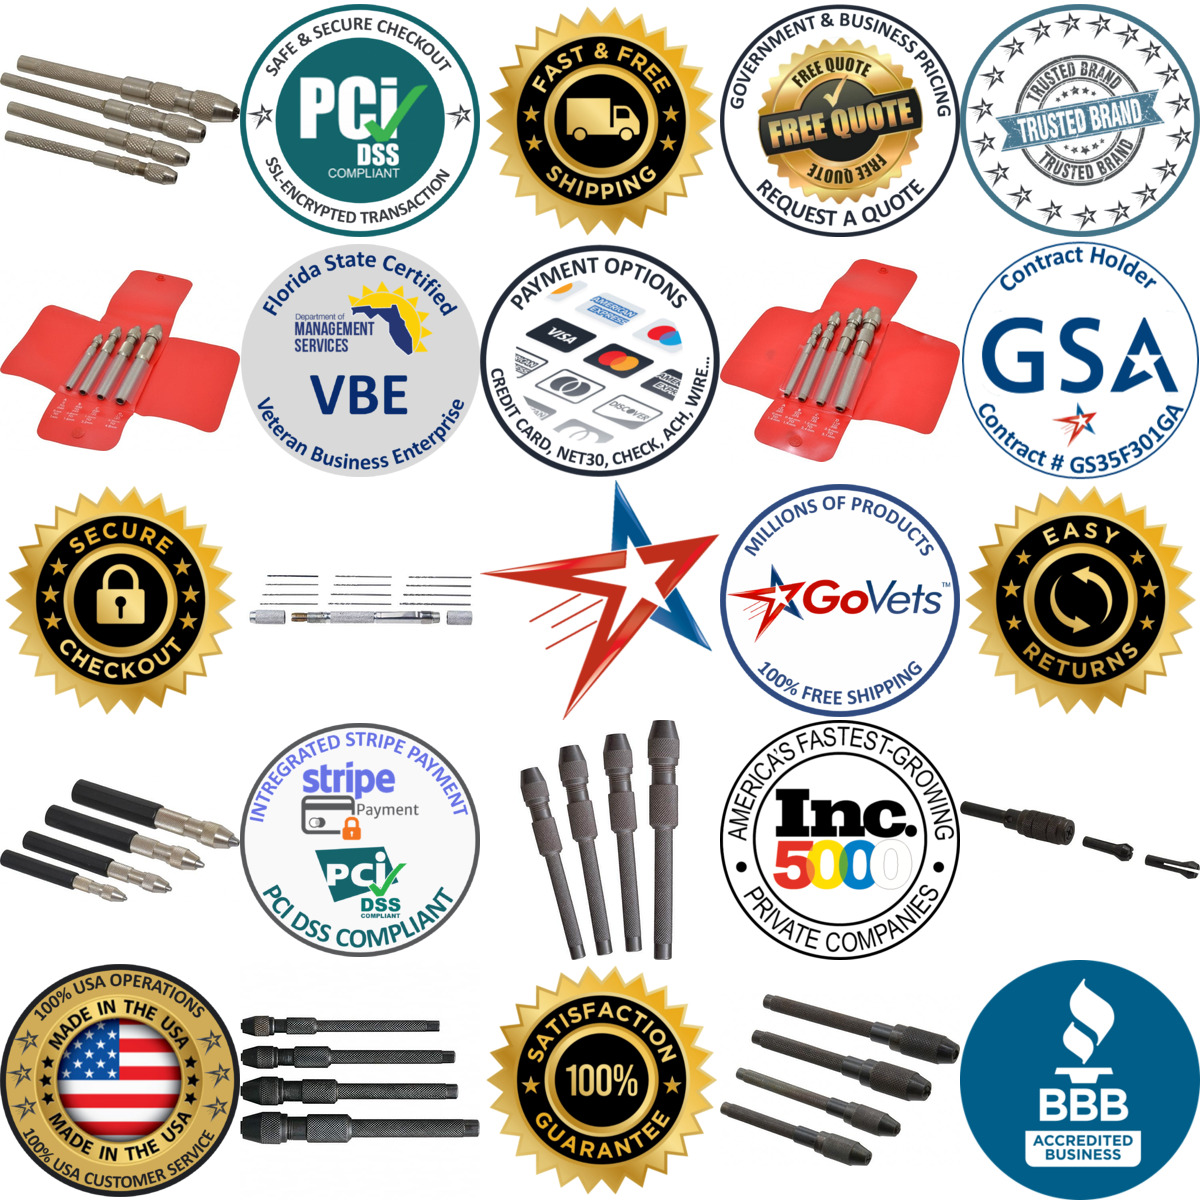 A selection of Pin Vise Sets products on GoVets